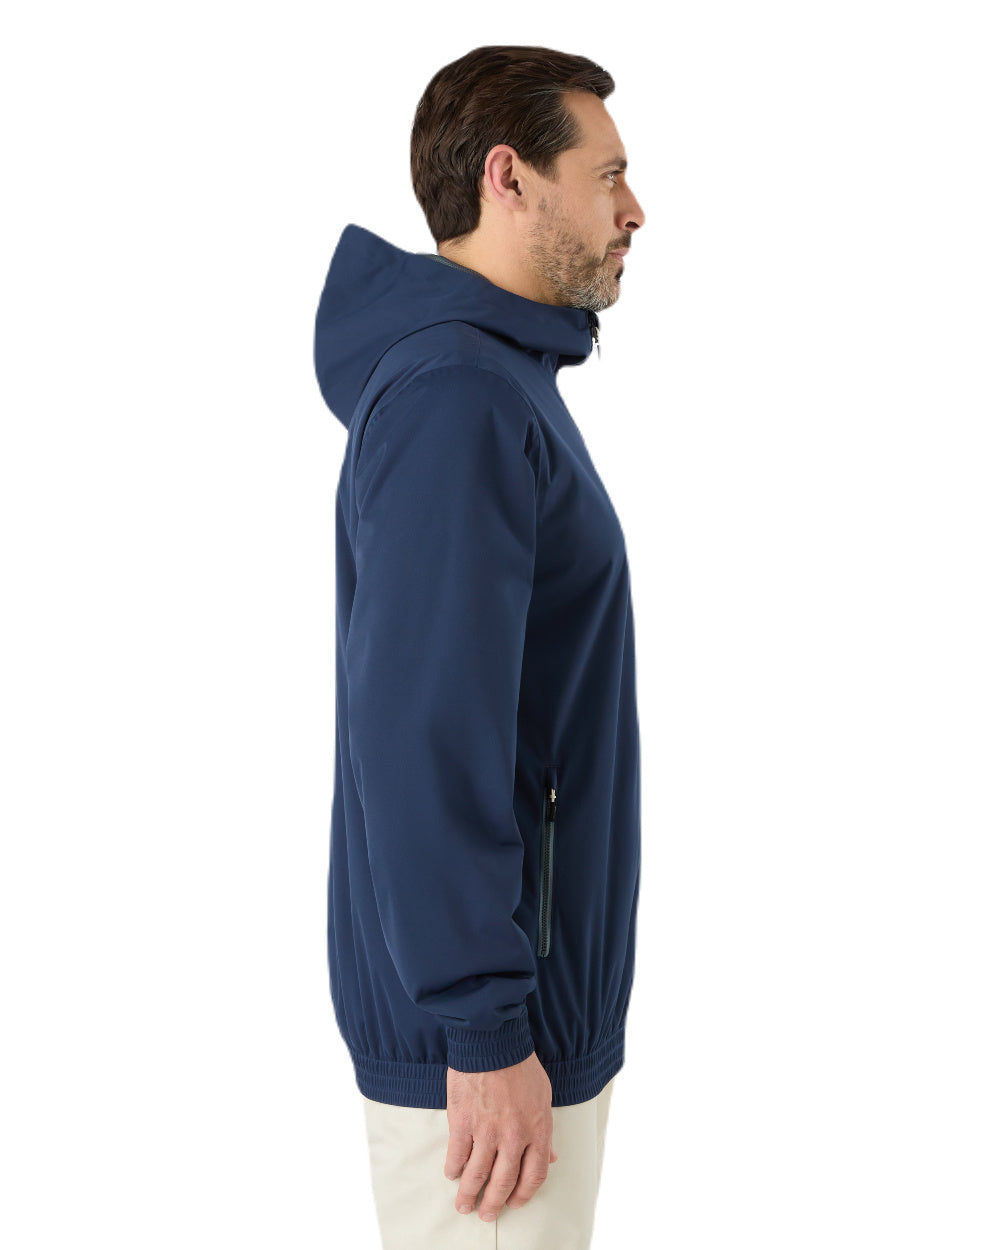 Navy Coloured Musto Mens Active Rain Jacket On A White Background 